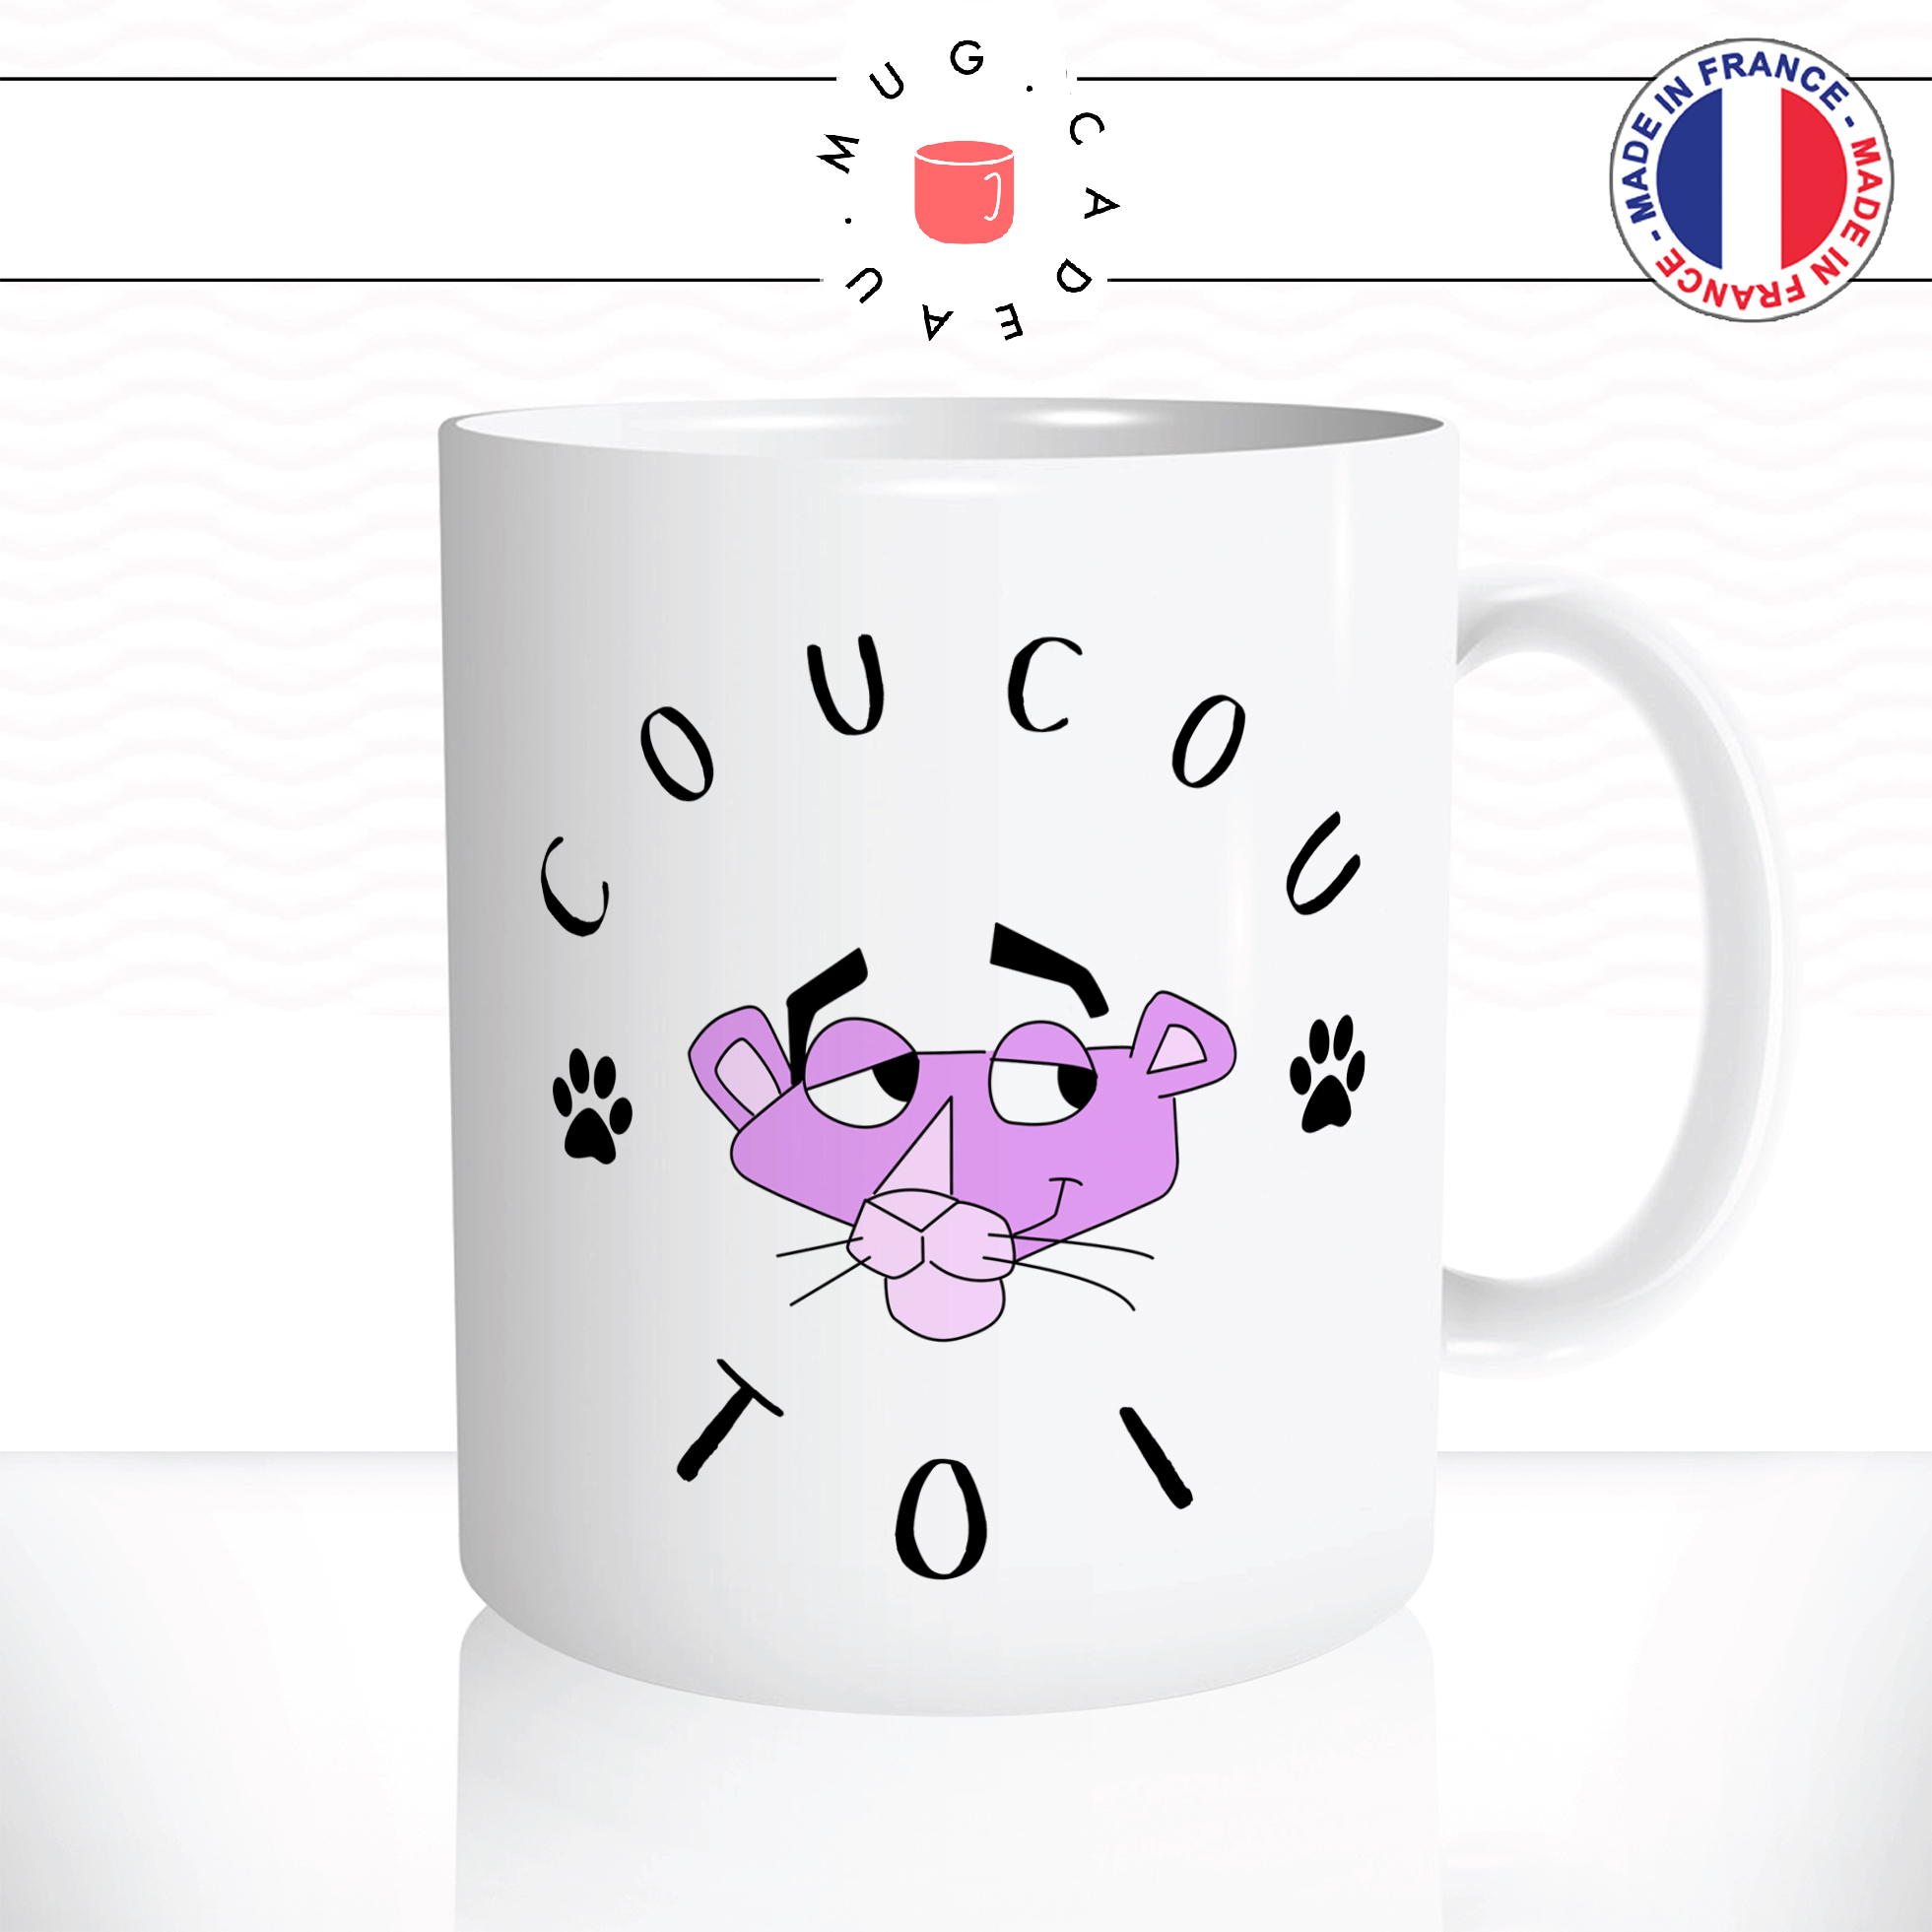 mug-tasse-ref39-dessin-anime-panthere-rose-couleurs-tete-simple-coucou-toi-pattes-animal-cafe-the-mugs-tasses-personnalise-anse-droite